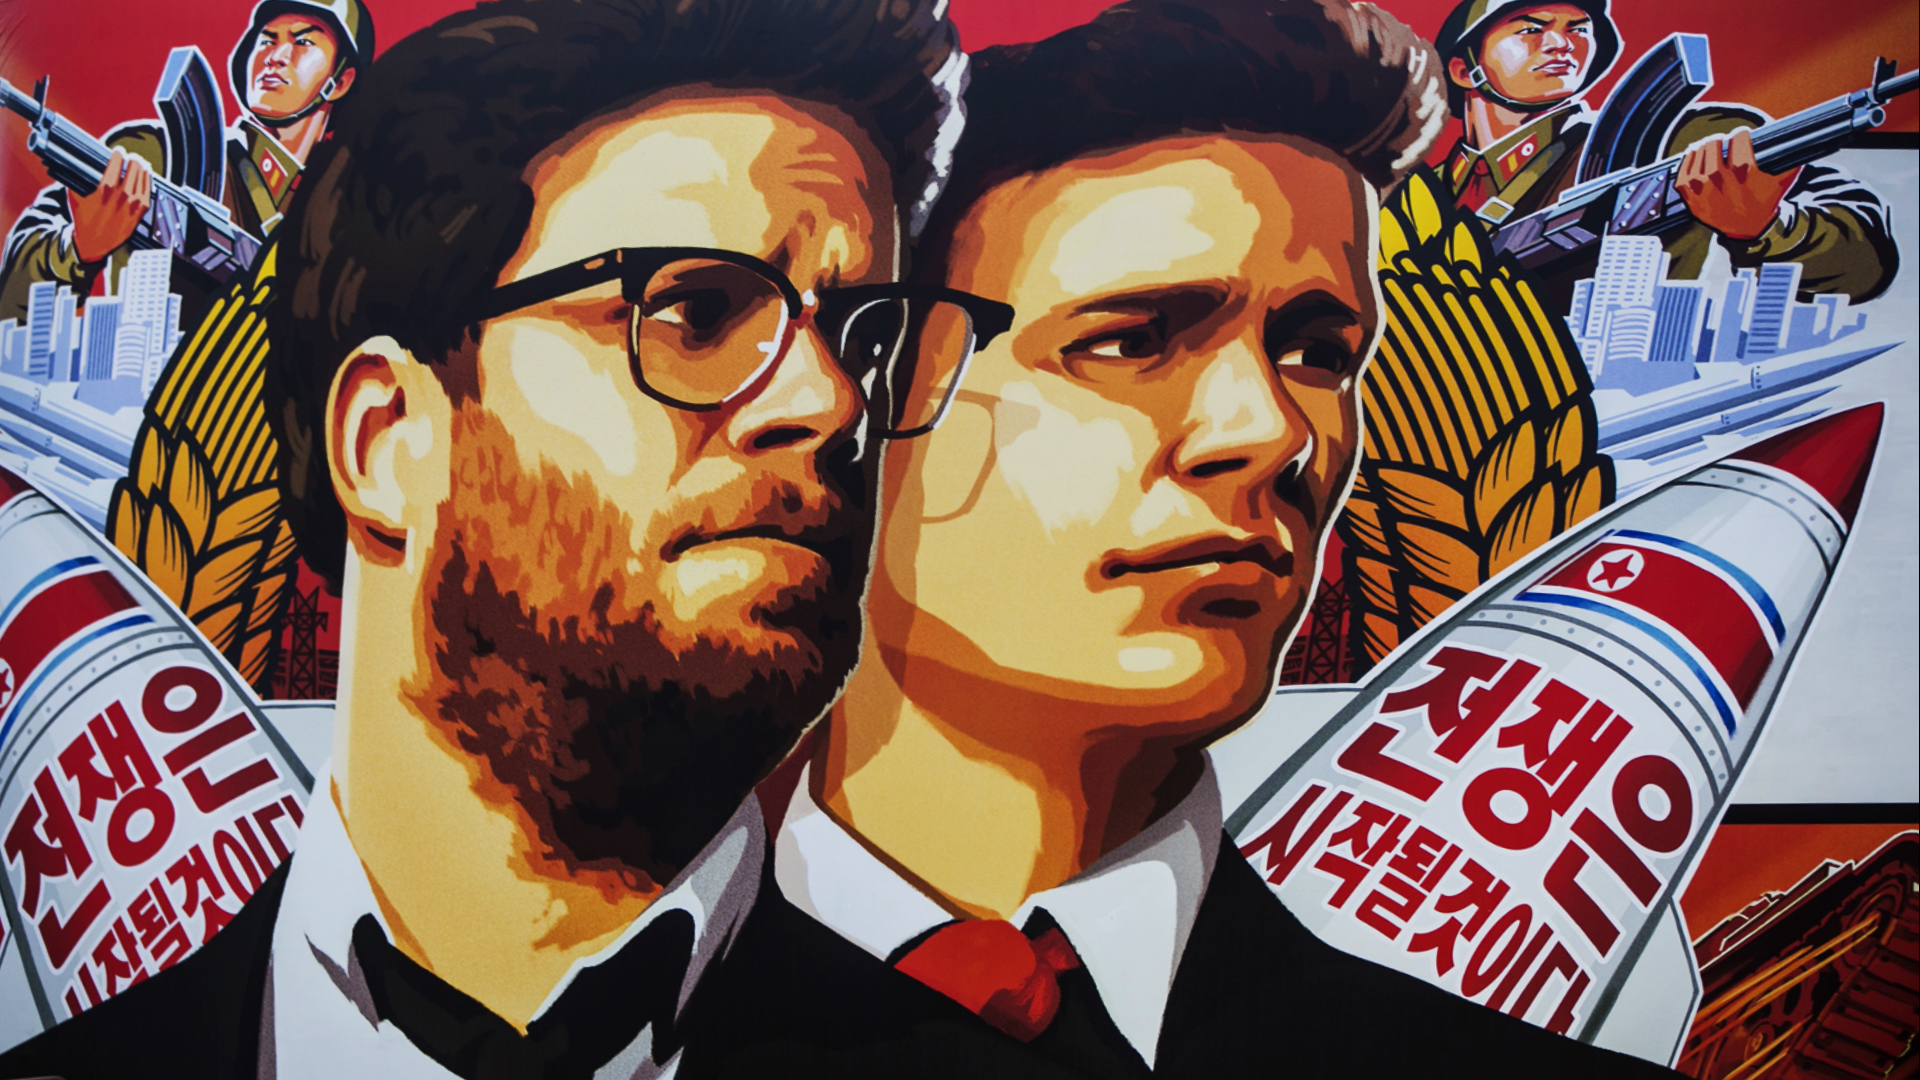 The Interview 1920x1080